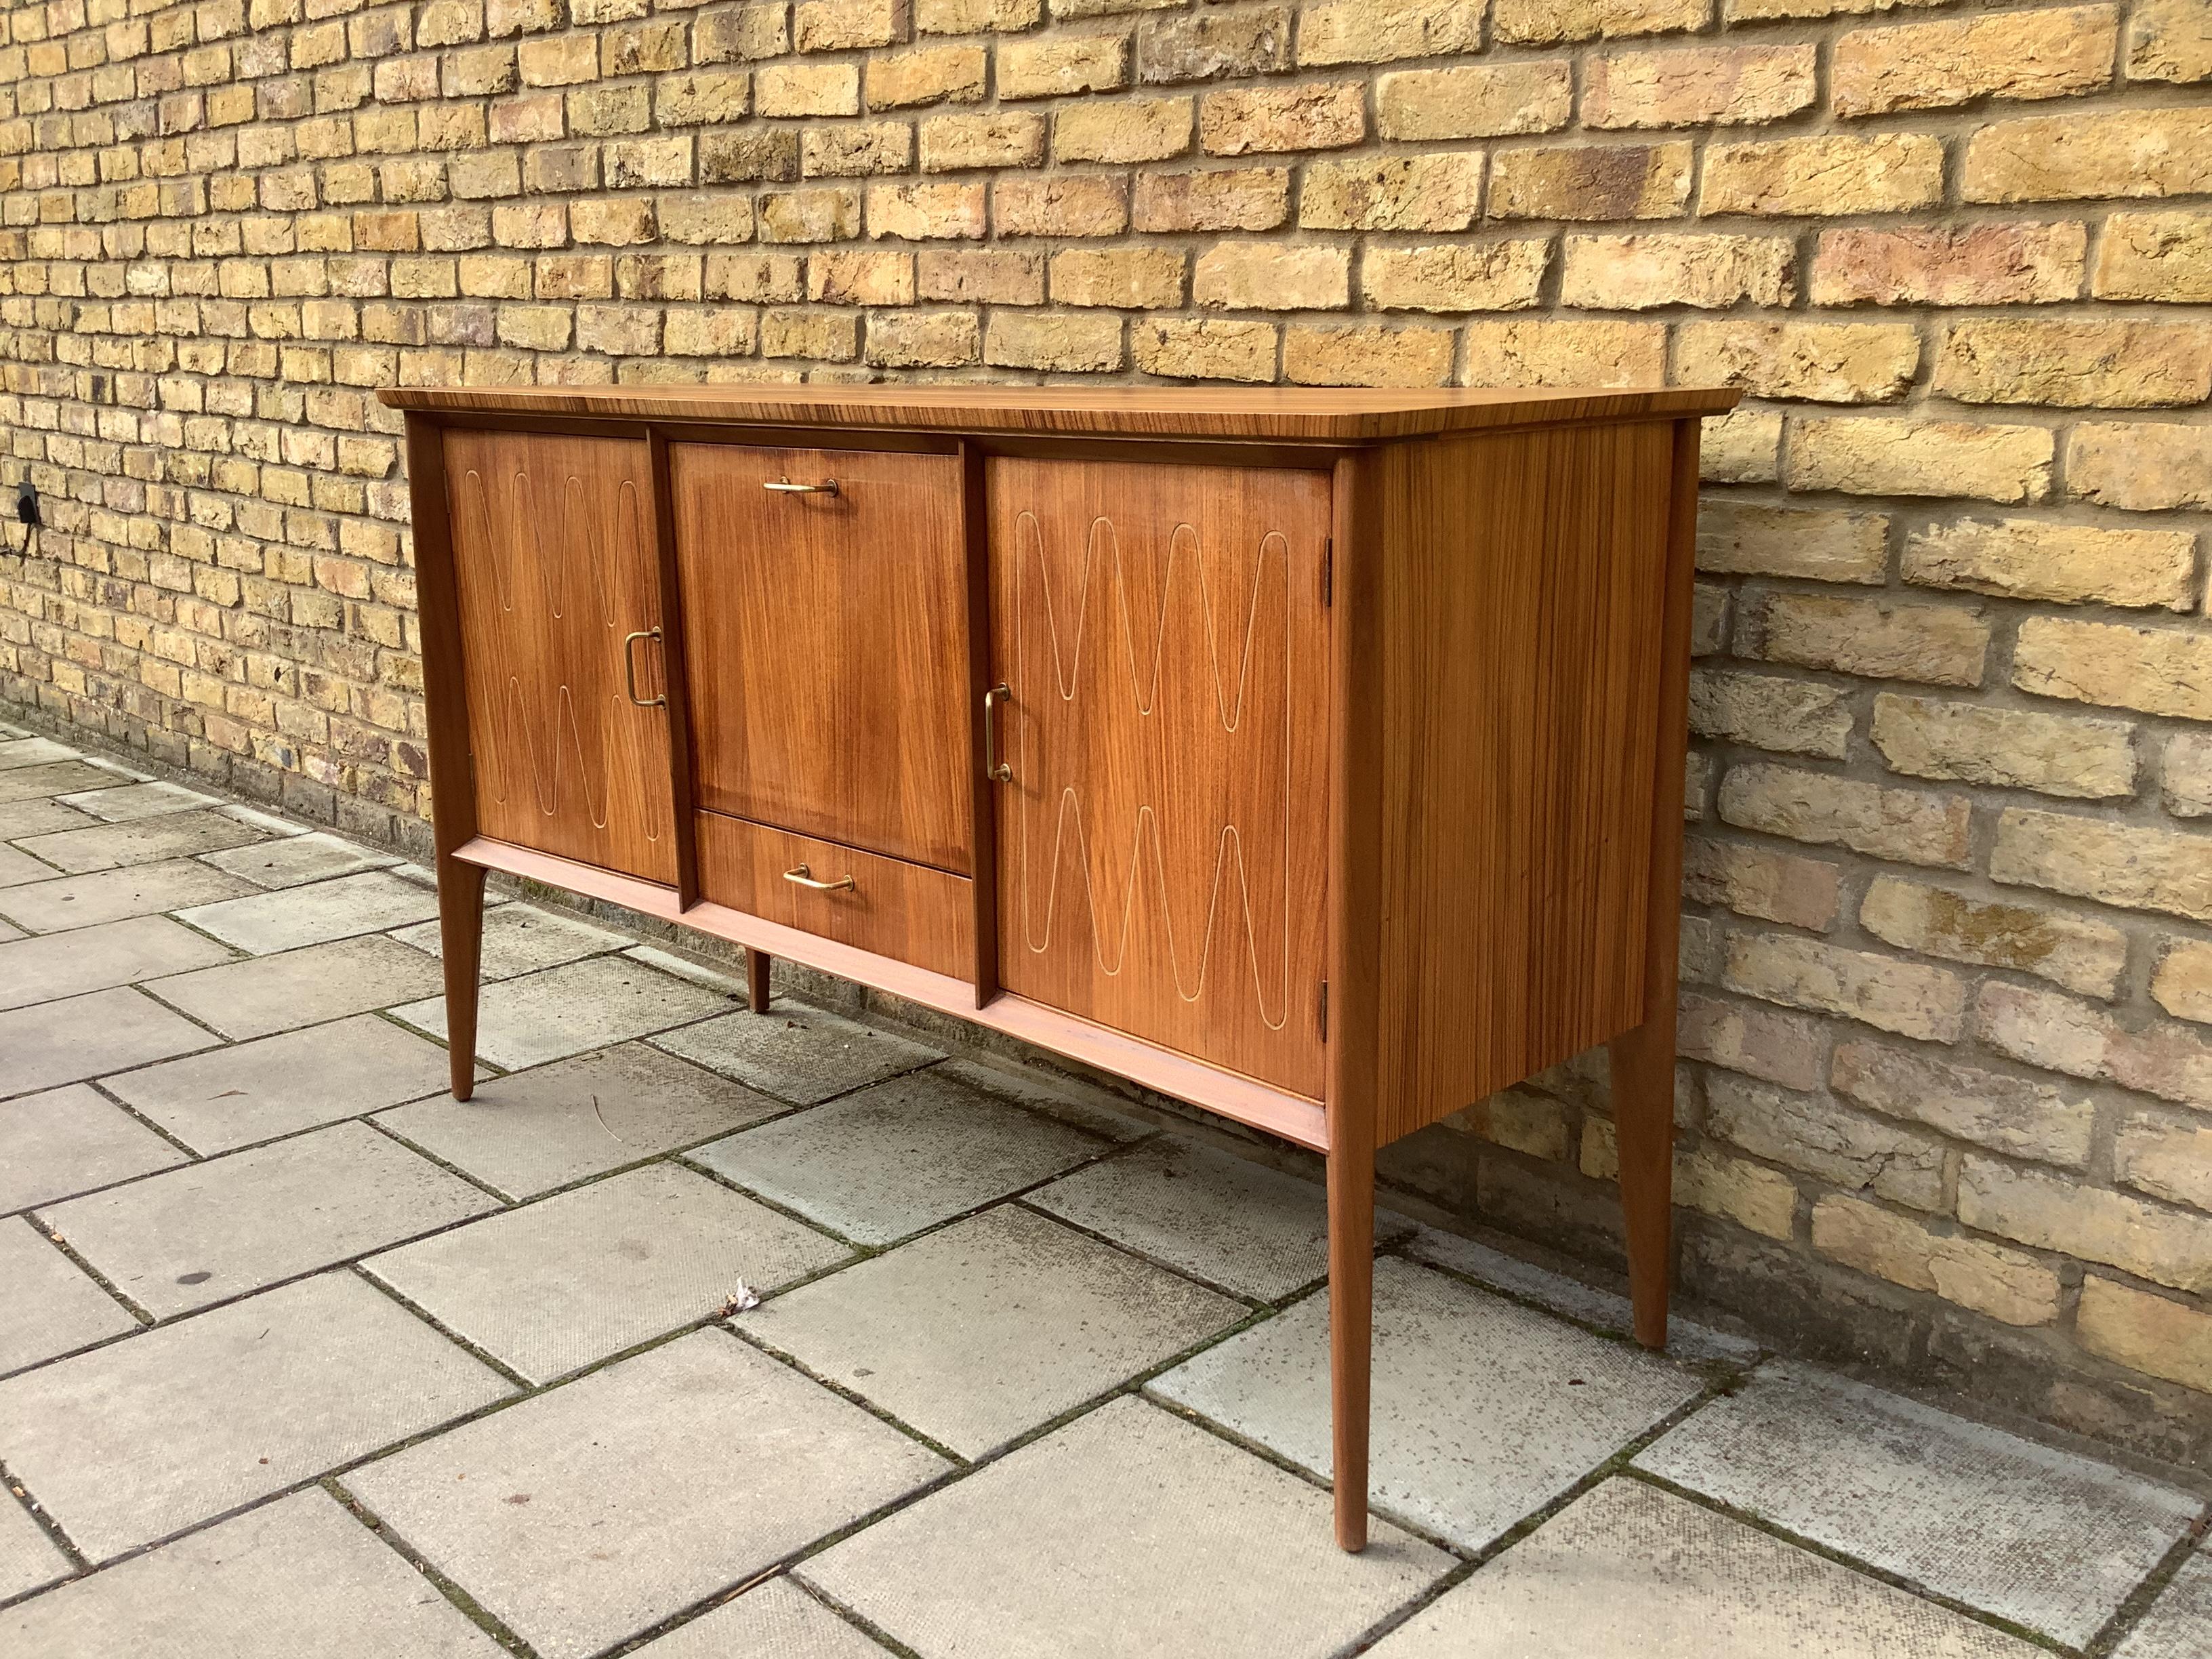 A stunning sideboard/ drink cabinet with brass handles and double helix design for Gordon Russell by David Booth.

Cc1950’s

 

 

Sir Gordon Russell shaped the history of 20th-century British design, bridging the gap from the arts and